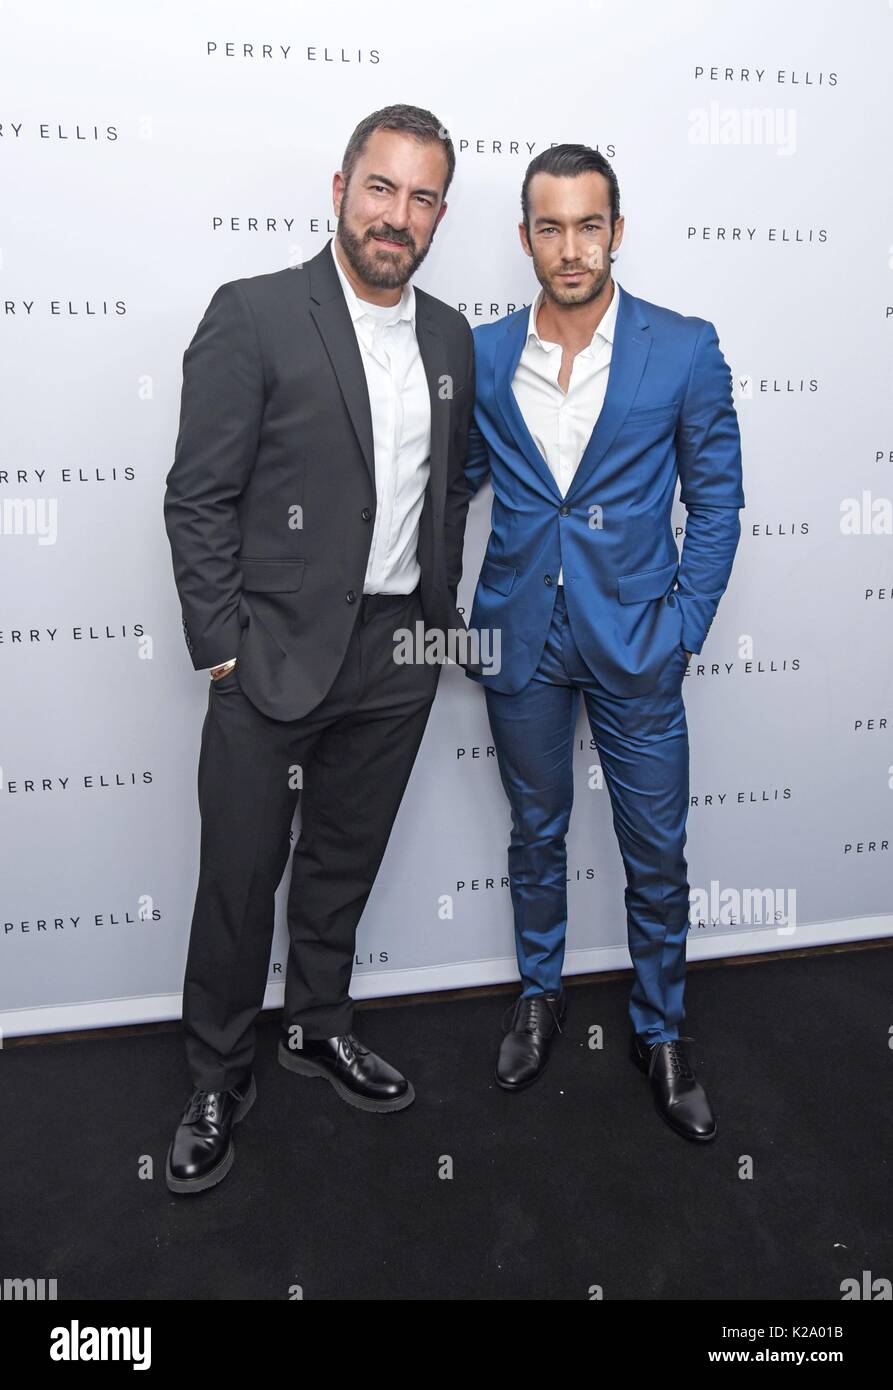 New York, NY, USA. 29th Aug, 2017. Michael Maccari, Creative Director of Perry Ellis, Aaron Diaz at arrivals for Perry Ellis Men's Fragrance Launch, Kola House, New York, NY August 29, 2017. Credit: Derek Storm/Everett Collection/Alamy Live News Stock Photo